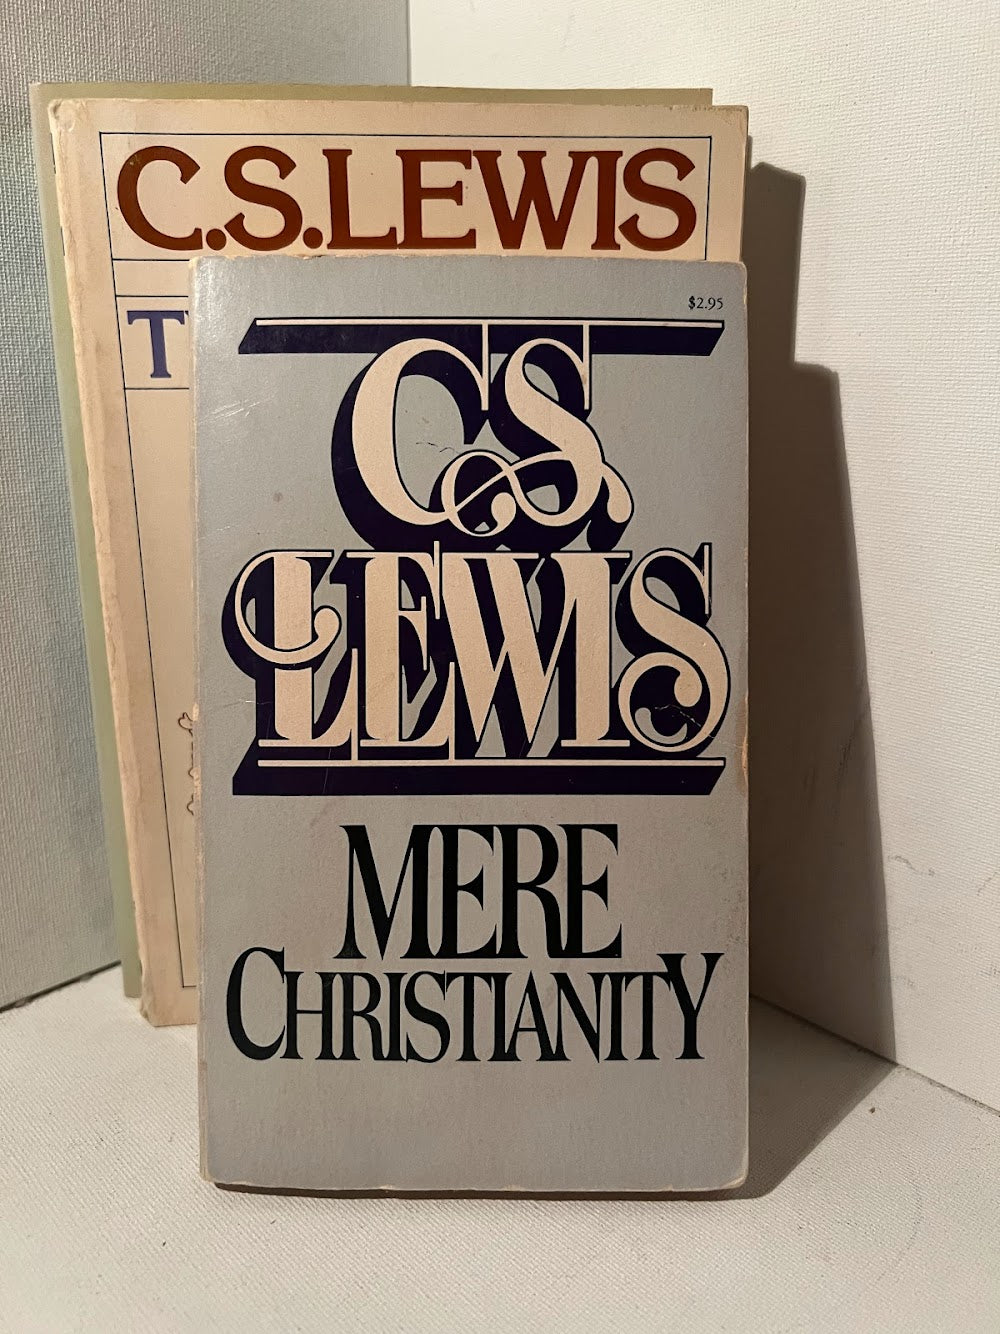 6 books by C.S. Lewis